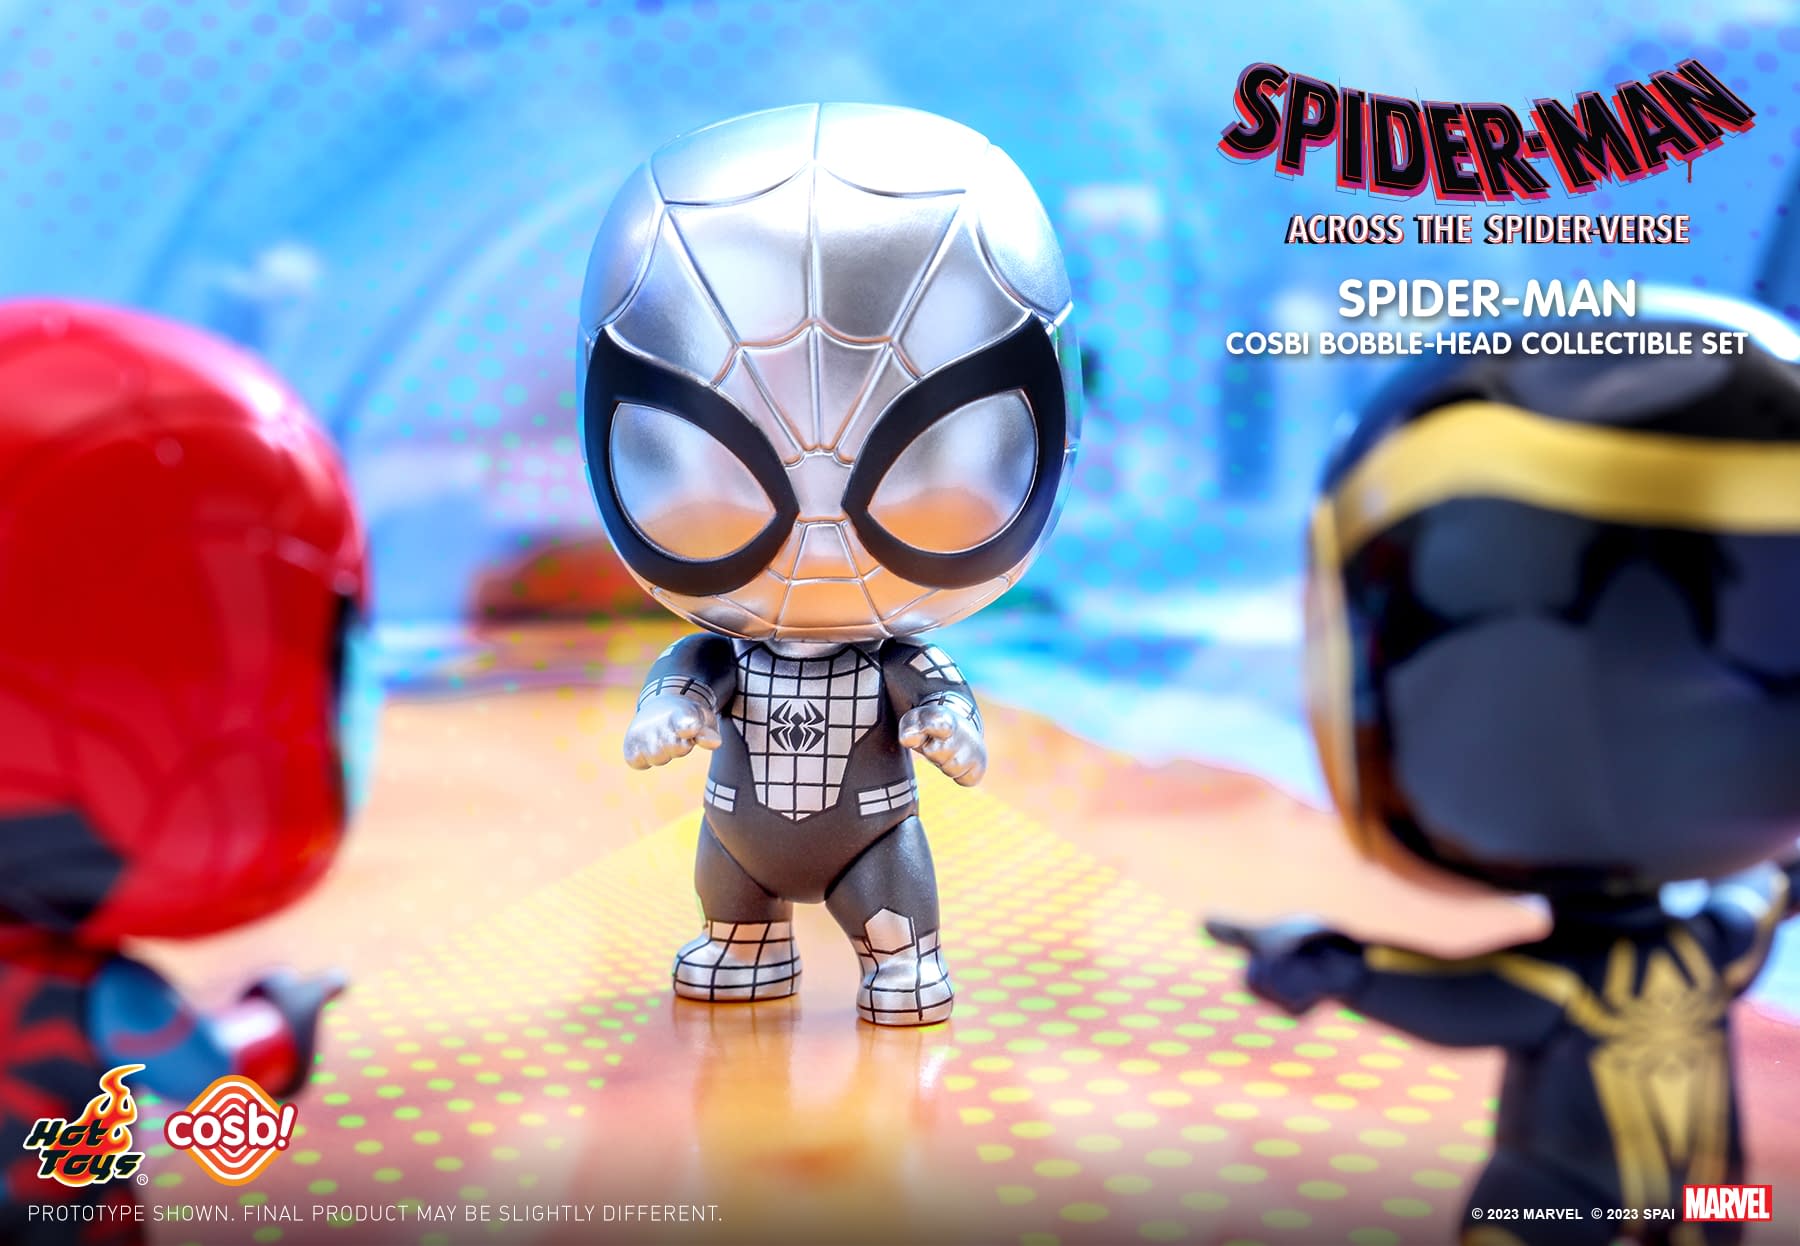 Enter the Spider Society with Hot Toys Newest Spider-Man Cosbi Set4